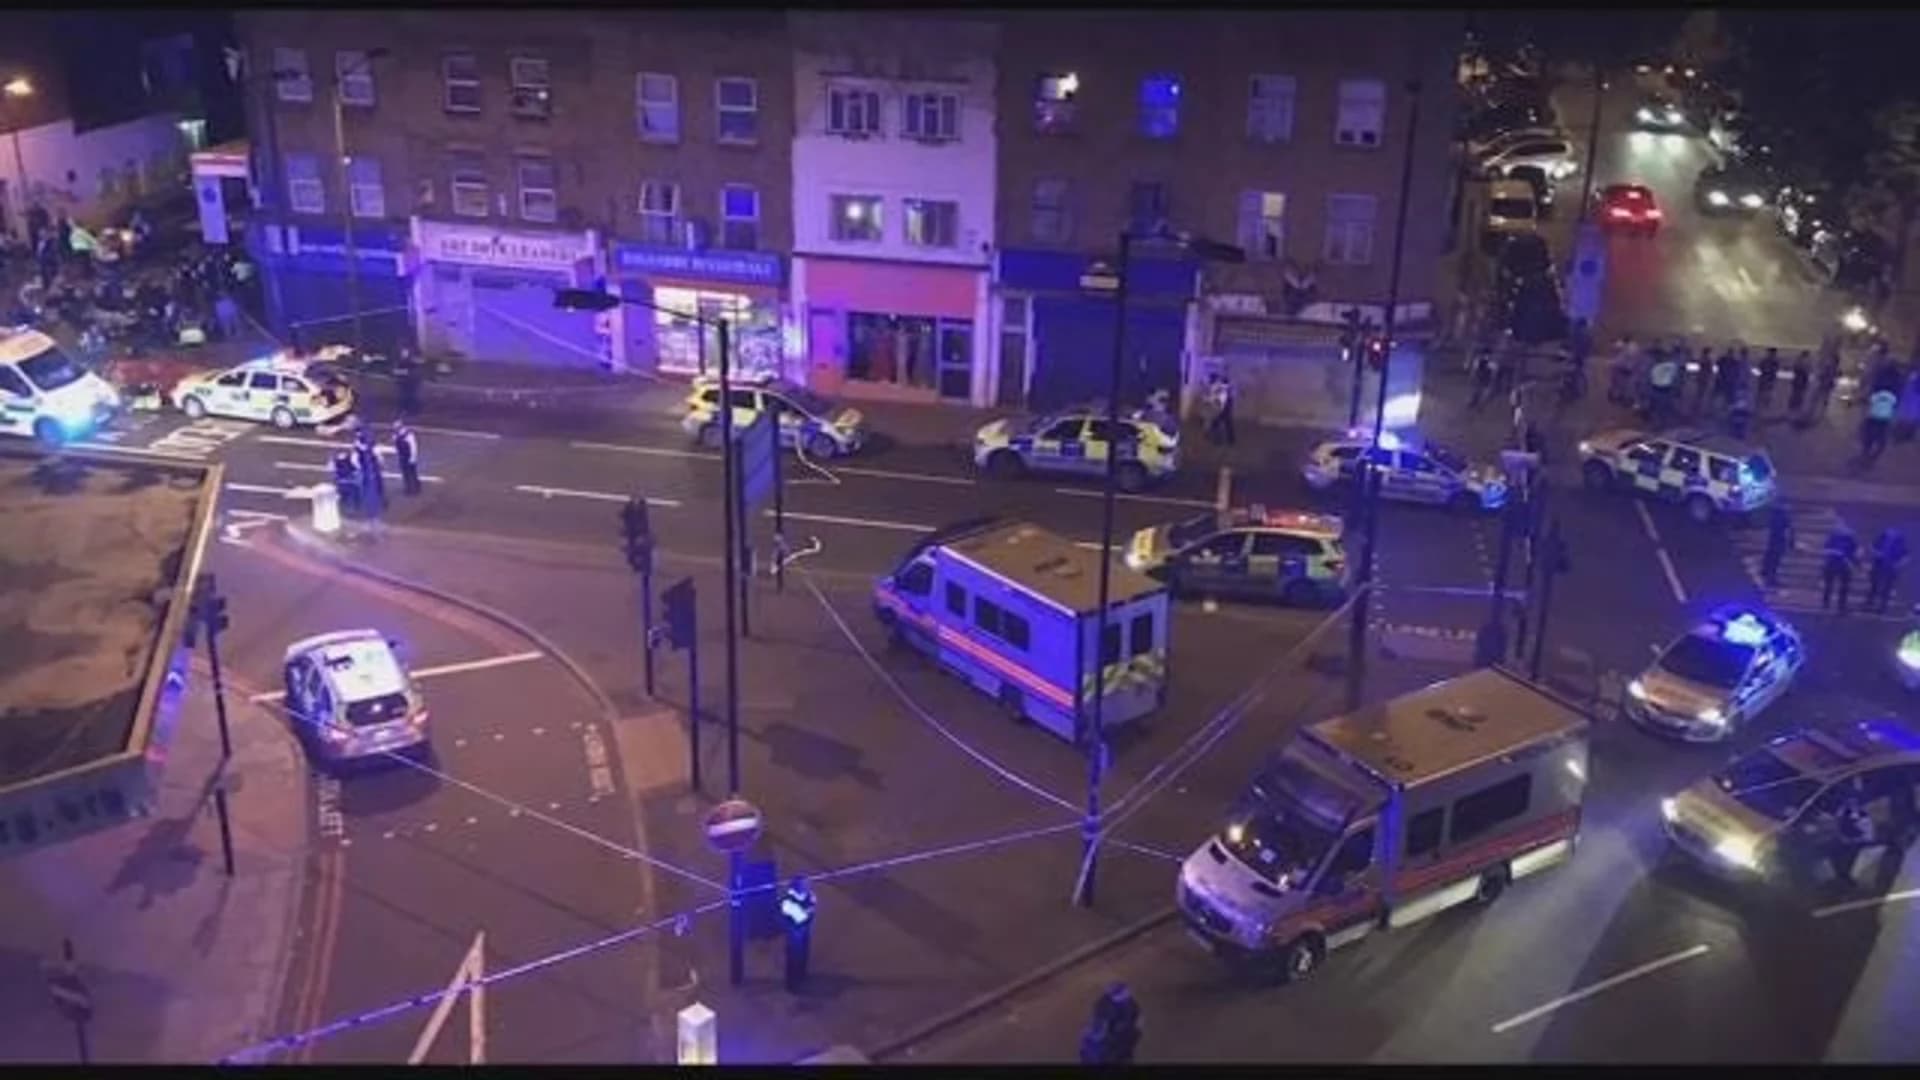 Van attack on London Muslims suggests new polarization